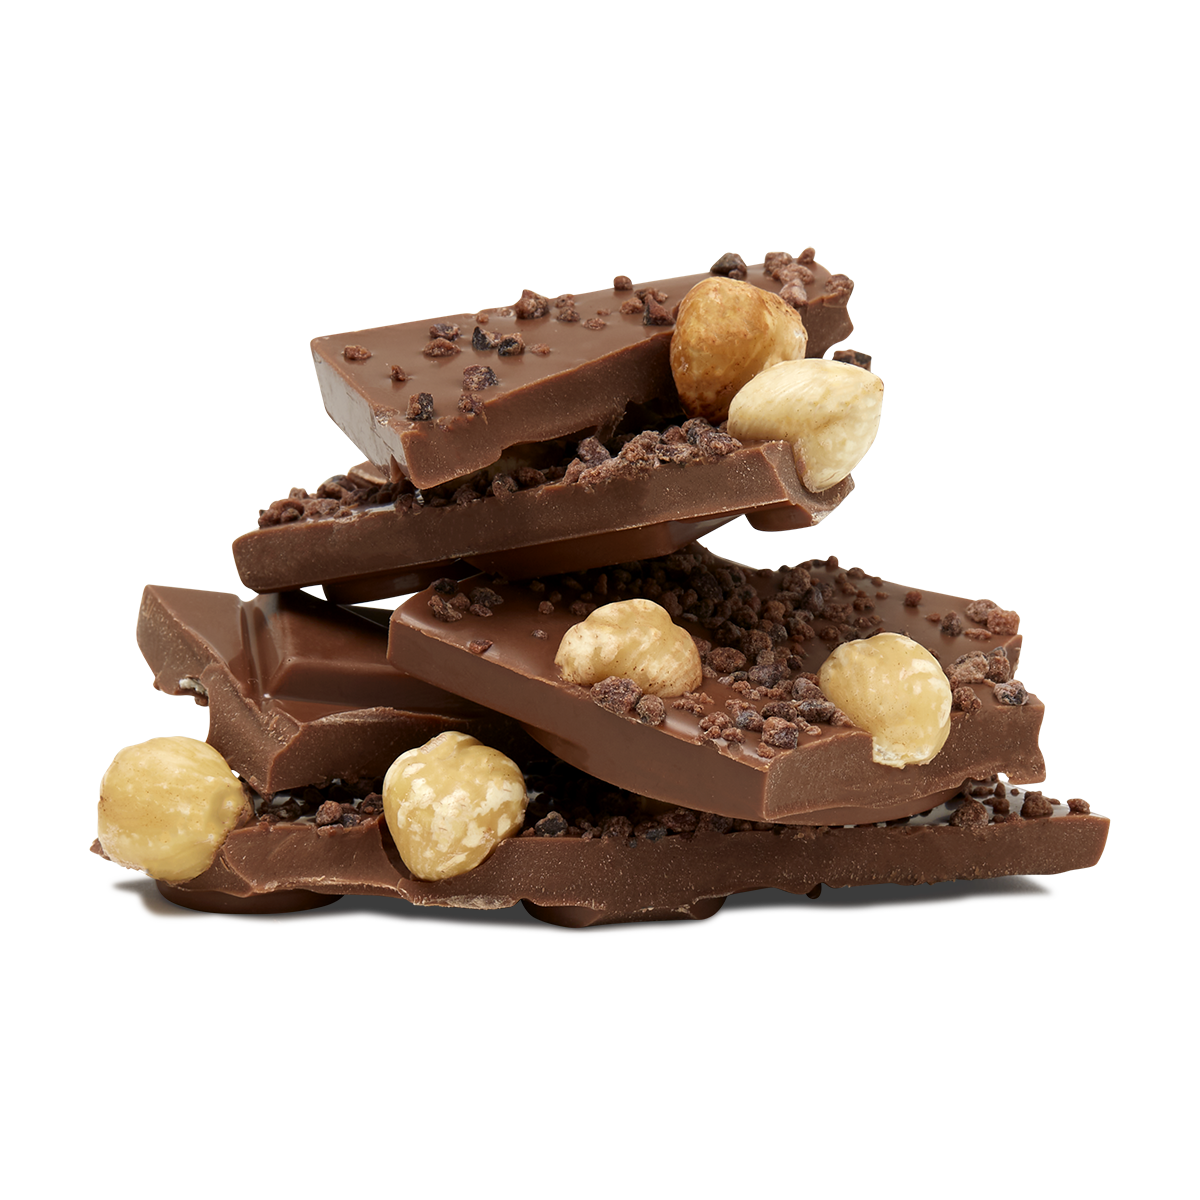 Broken chocolate pieces with hazelnut stacked together